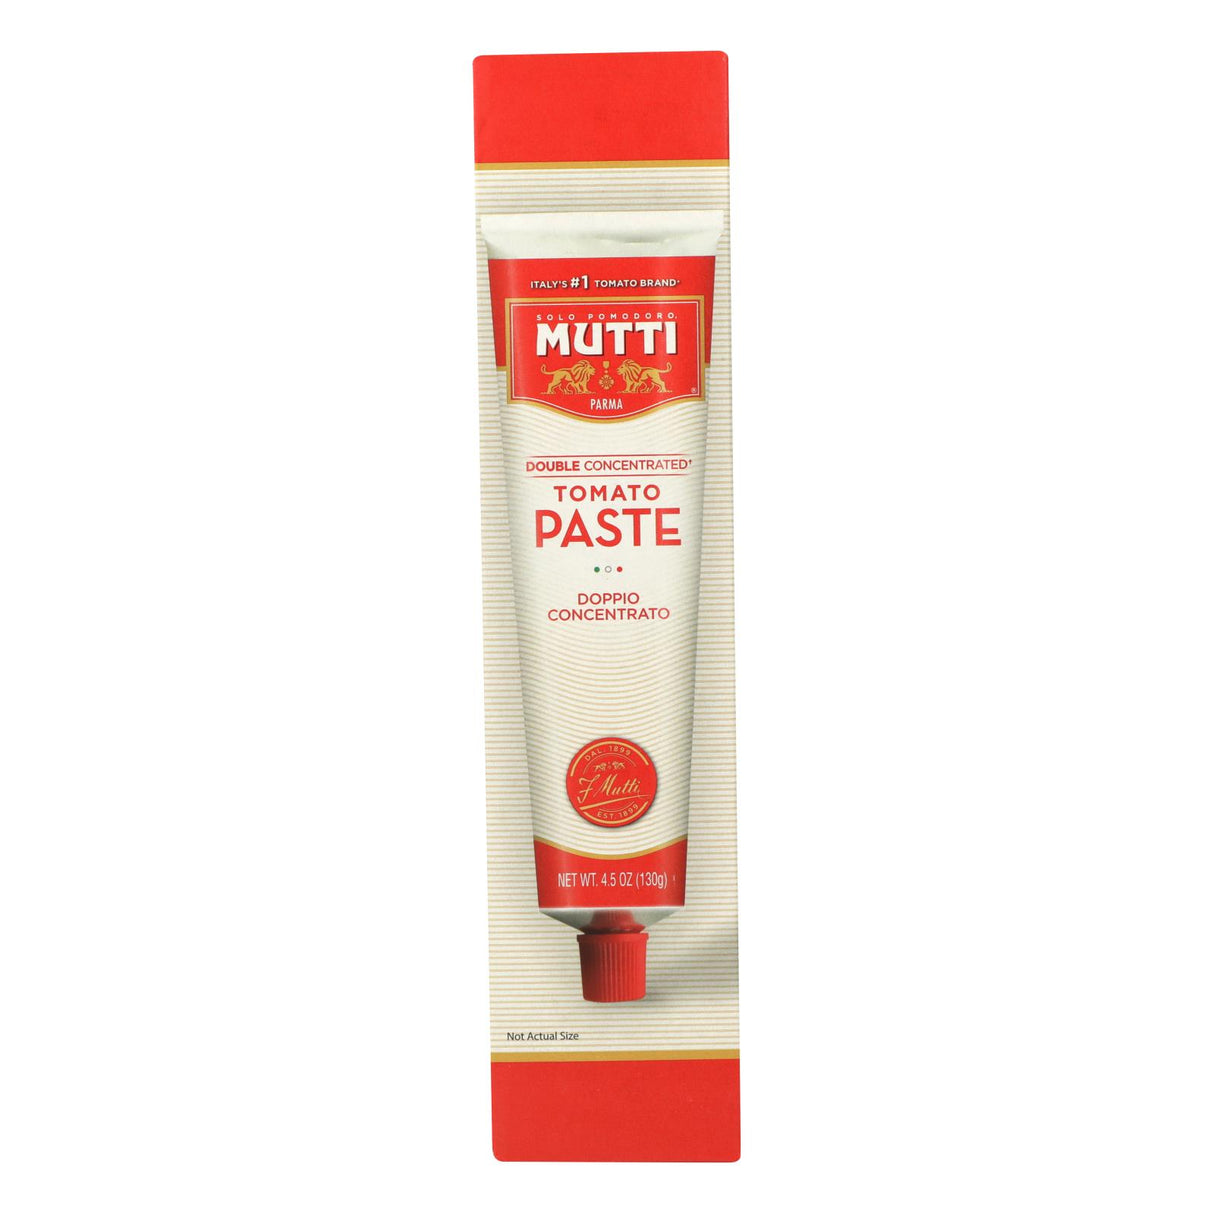 Mutti Double Concentrated Tomato Paste (Pack of 12 - 4.5 Oz.) - Cozy Farm 